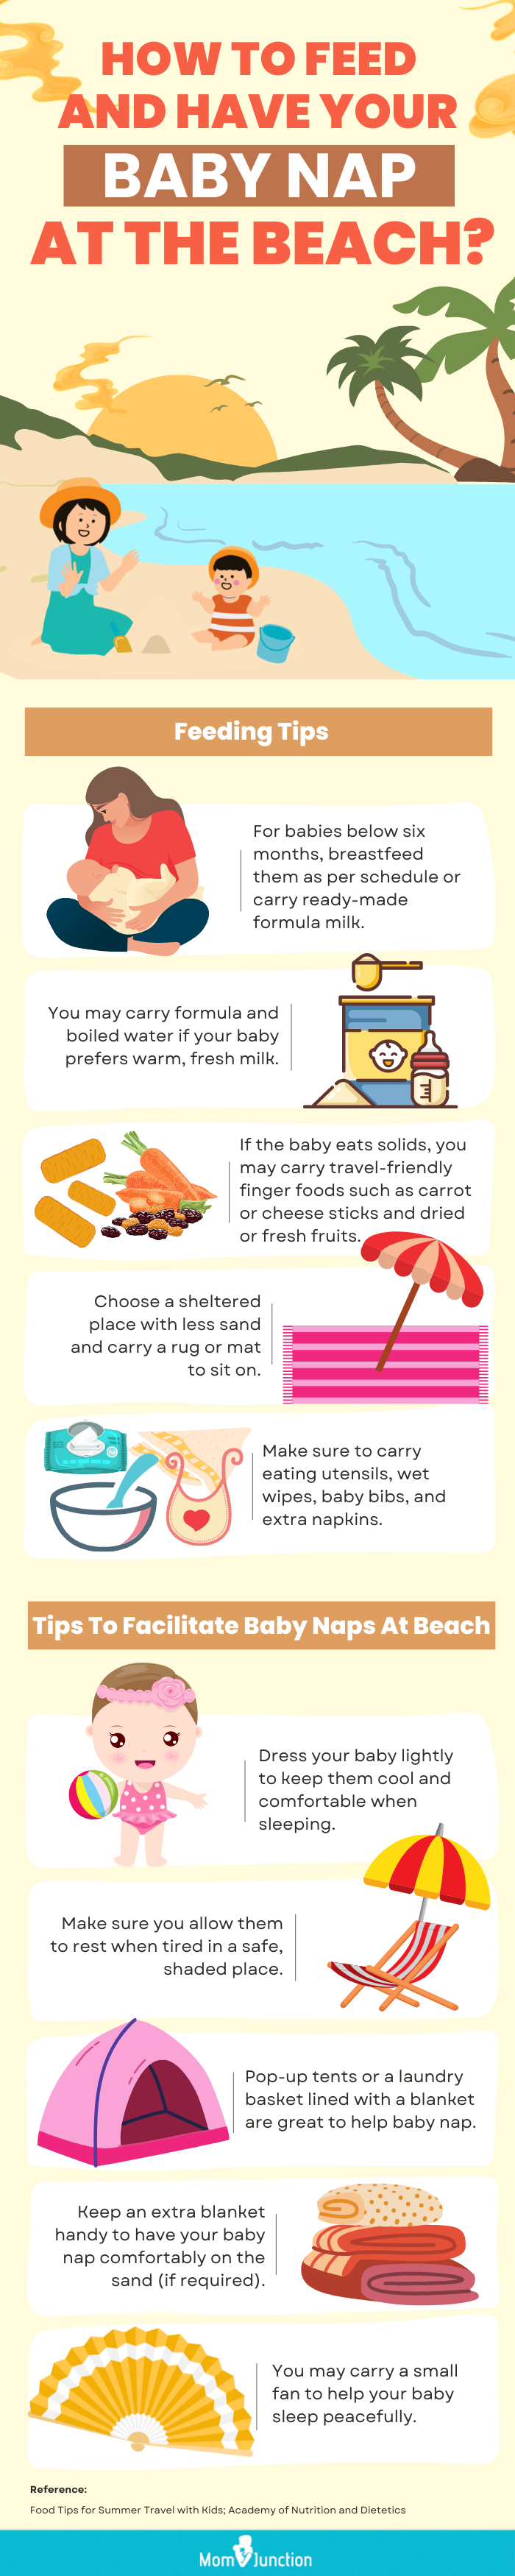 how to feed and have your baby Nap at the beach (infographic)